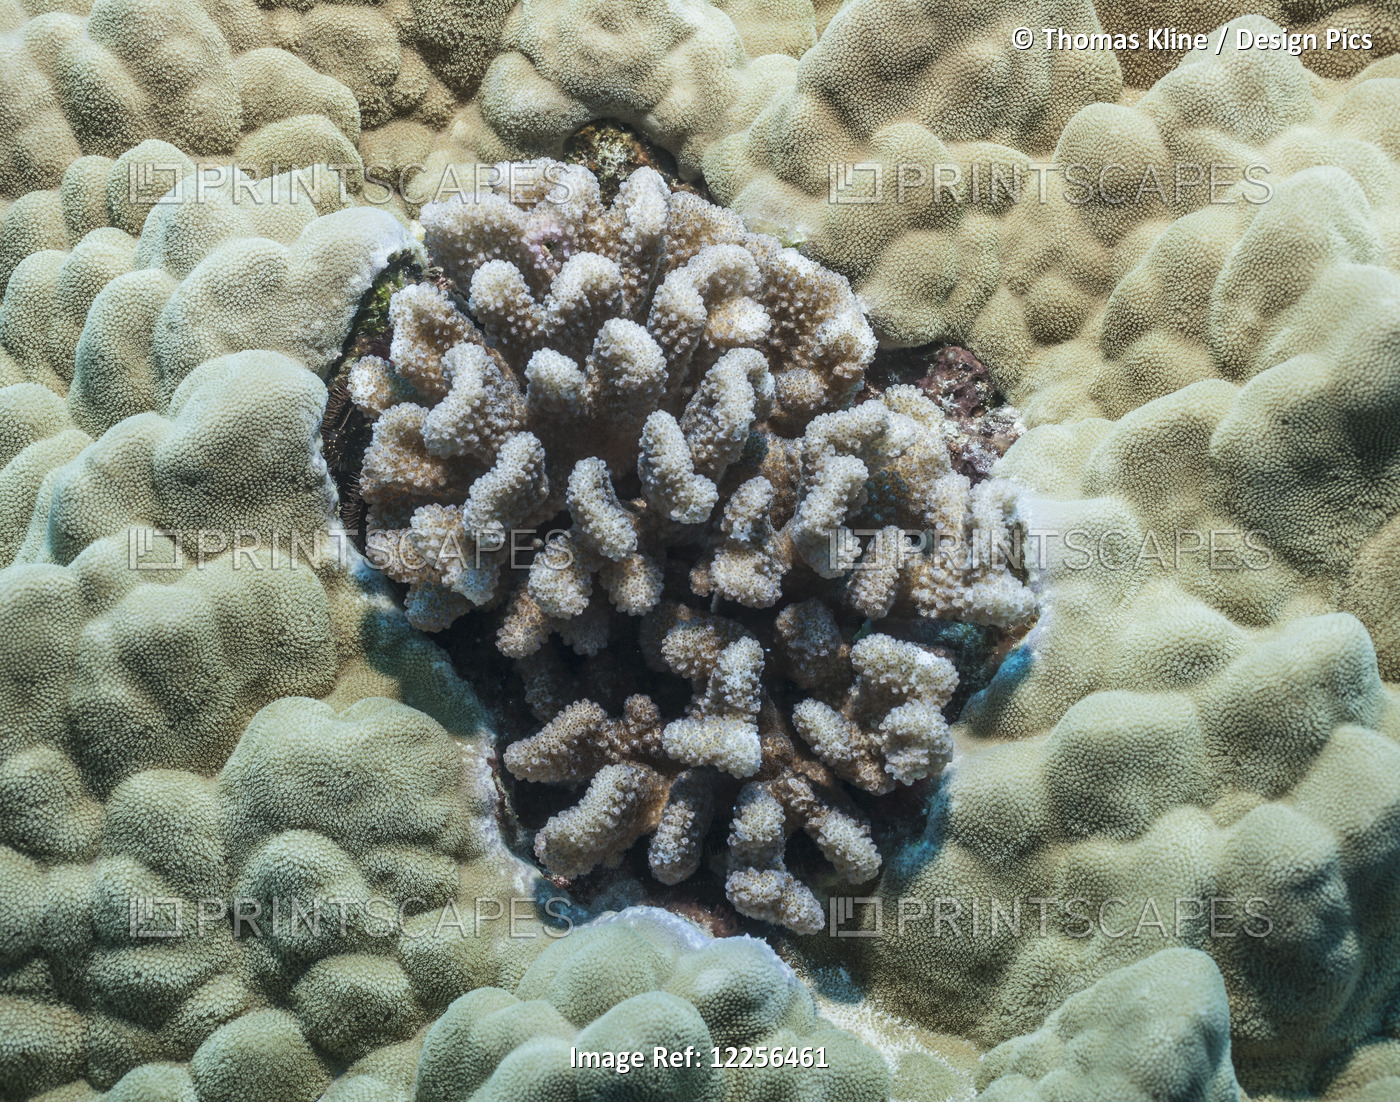 Cauliflower Coral surrounded by Lobe Coral 